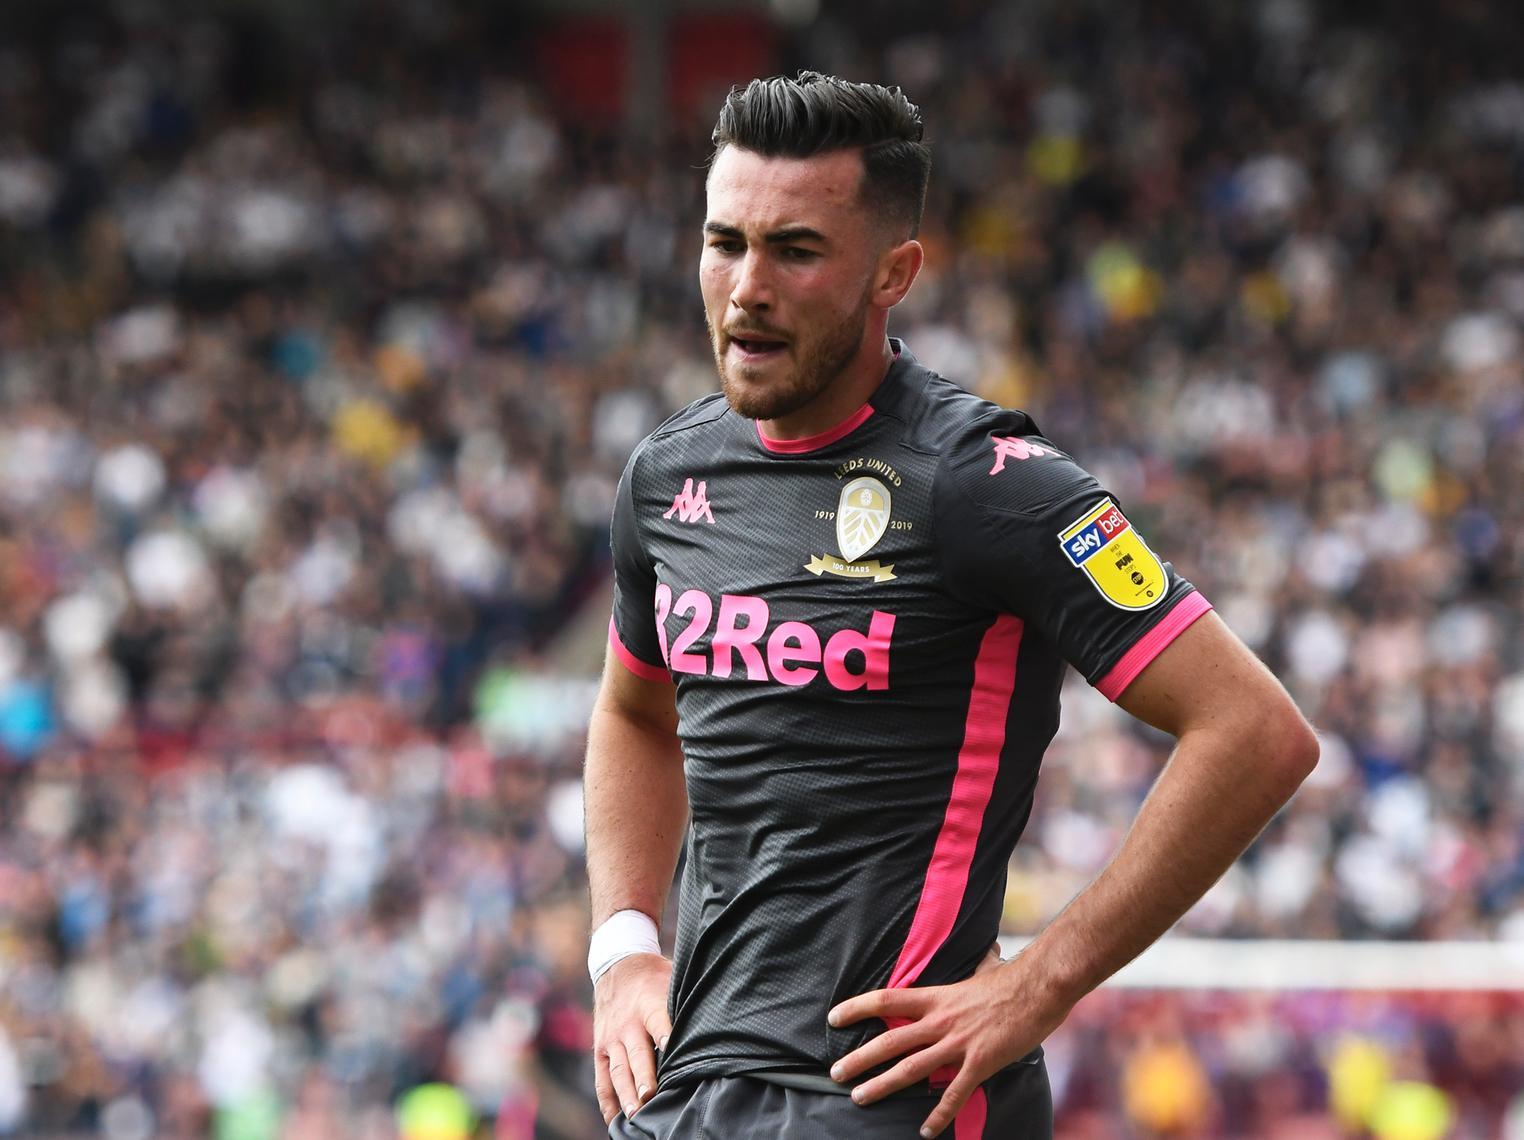 Assist machine Jack Harrison has been involved in every single one of United's last five goals. Four assists and one goal makes him undroppable in that run, surely?